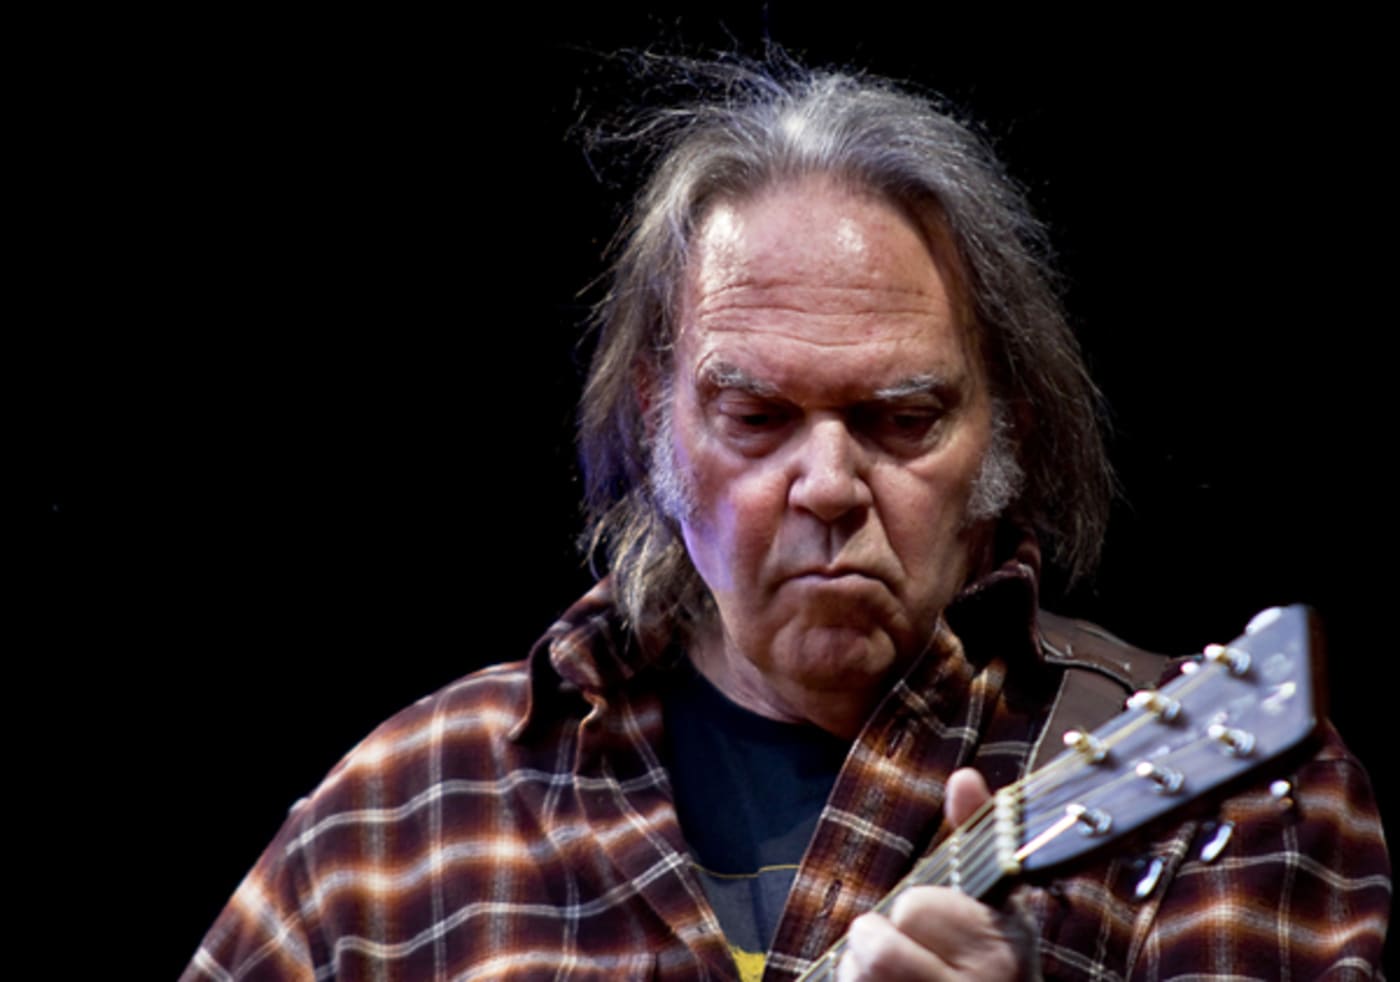 Neil Young is returning to Spotify after boycotting it over Joe Rogan's vaccine comments